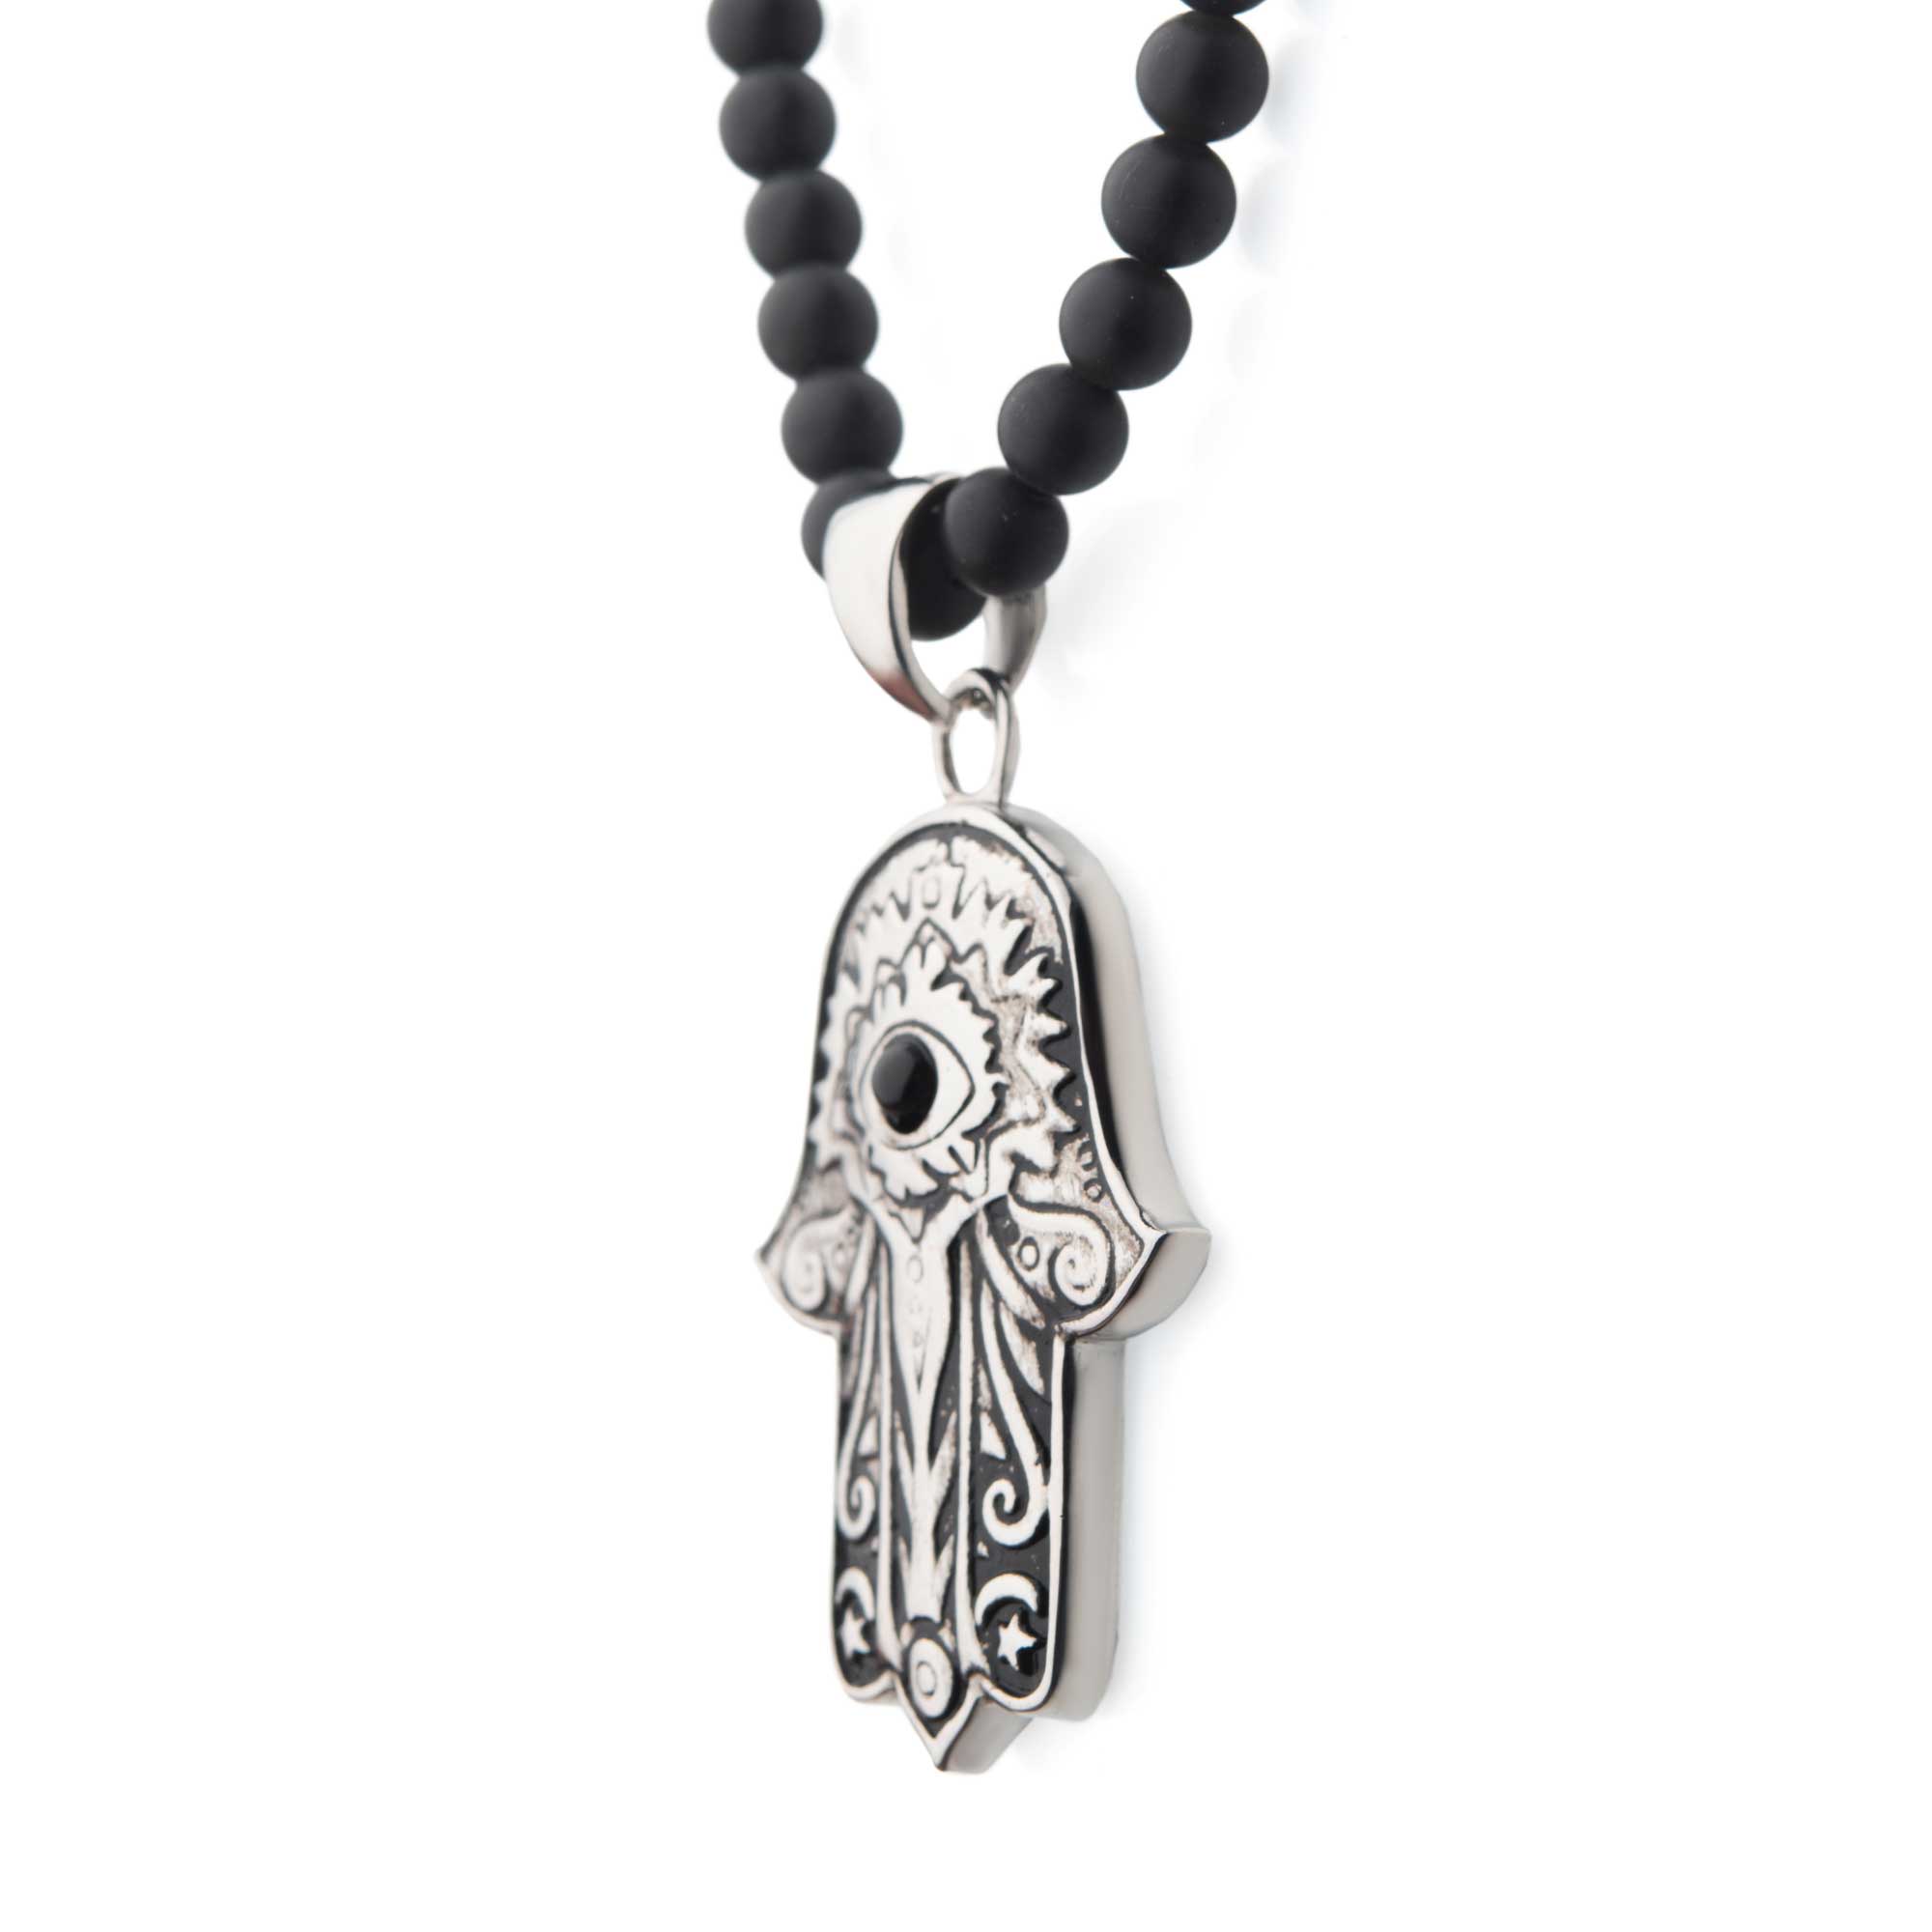 Stainless Steel with Centerpiece Black Agate Stone Hamsa Pendant, with Black Agate Stone Bead Necklace Image 3 Midtown Diamonds Reno, NV